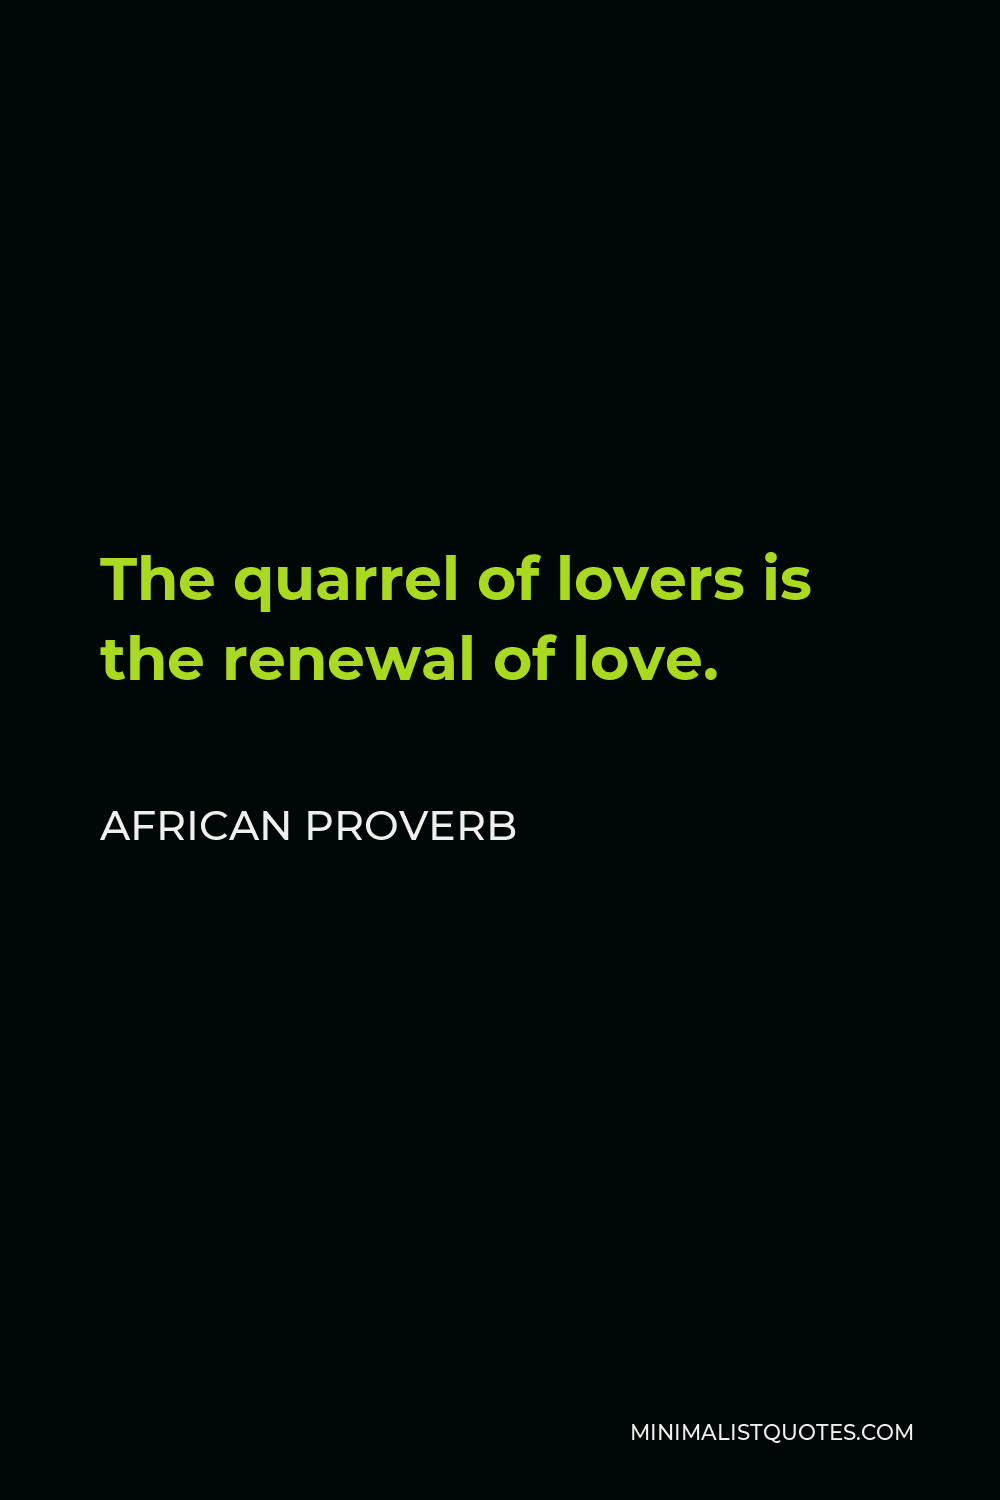 African Proverb Quote - The quarrel of lovers is the renewal of love.